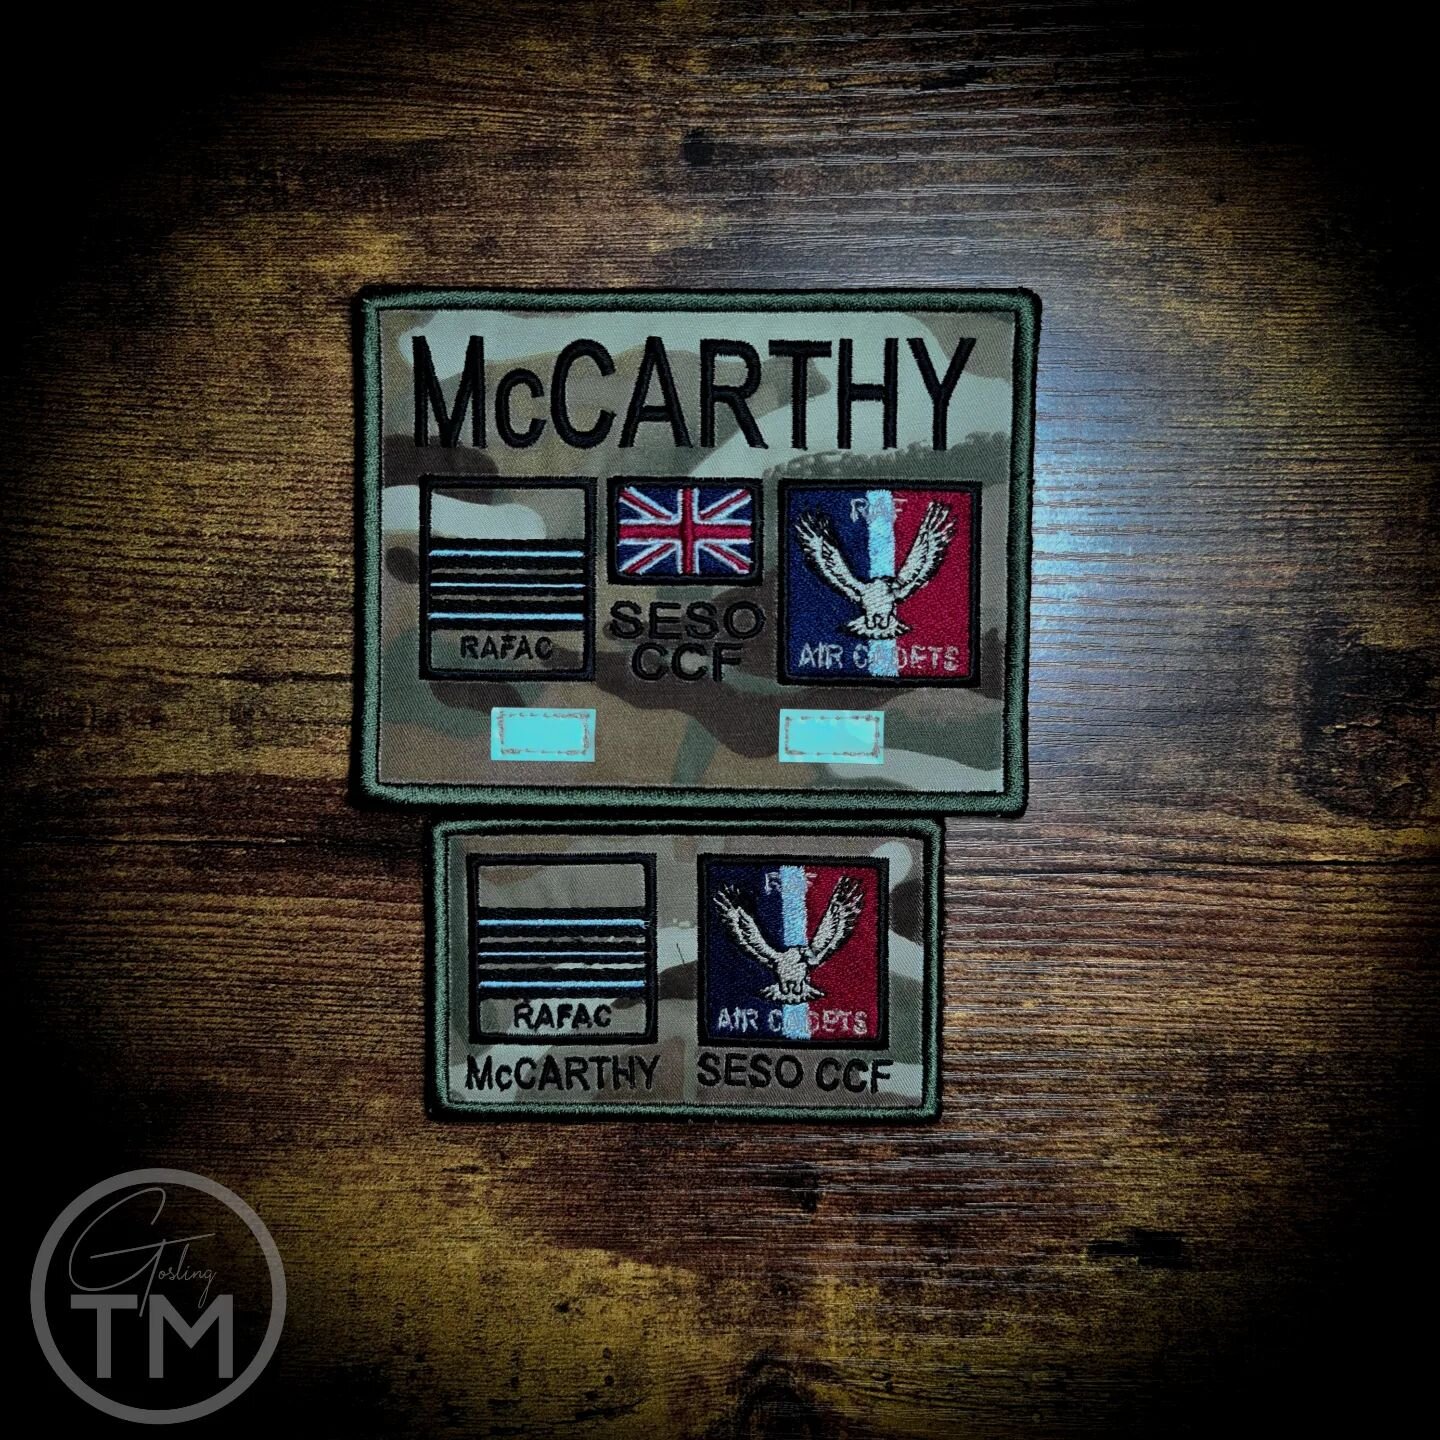 MCCARTHY

This photo introduces our smaller range of ZAPs, designed to fit on smaller velcro patches, helmets or Webbing. We thought it was really cool being able to make both styles of ZAP for this brilliant customer! 

If you would also like a set 